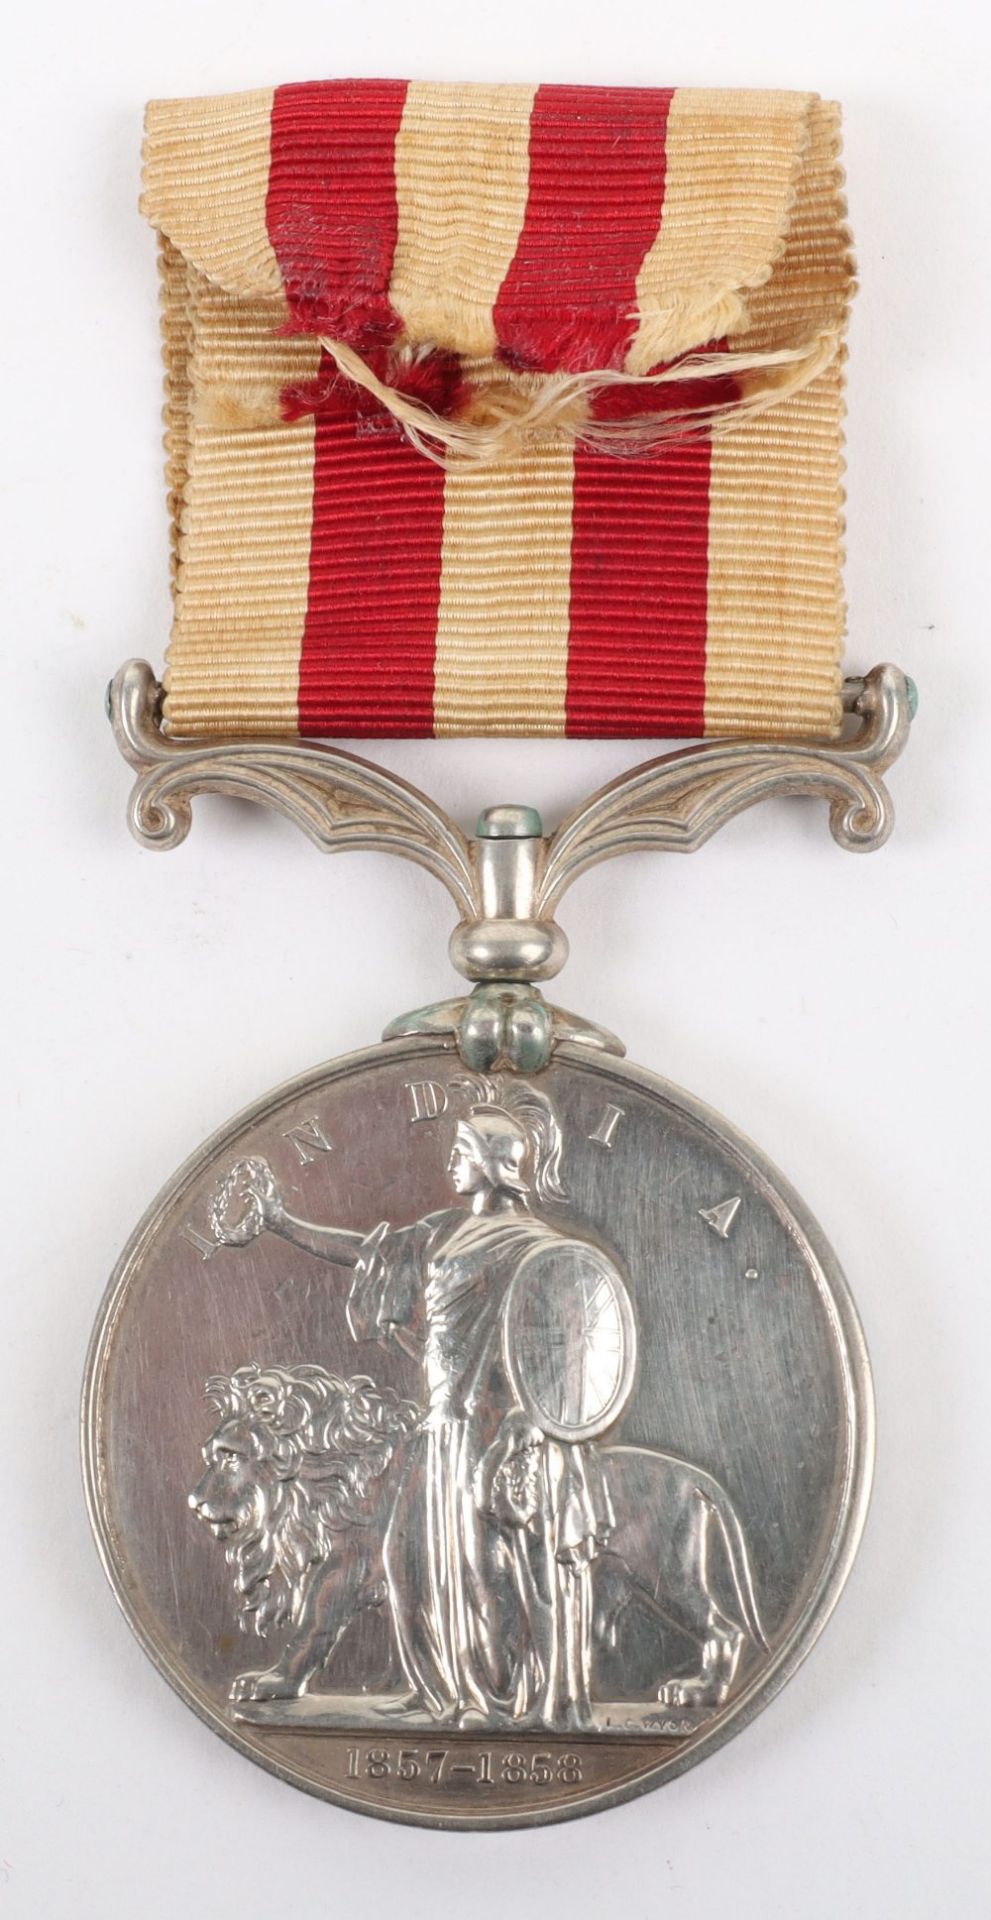 Indian Mutiny Medal 1857-59 Awarded to a Captain in the Madras Cavalry - Image 2 of 3